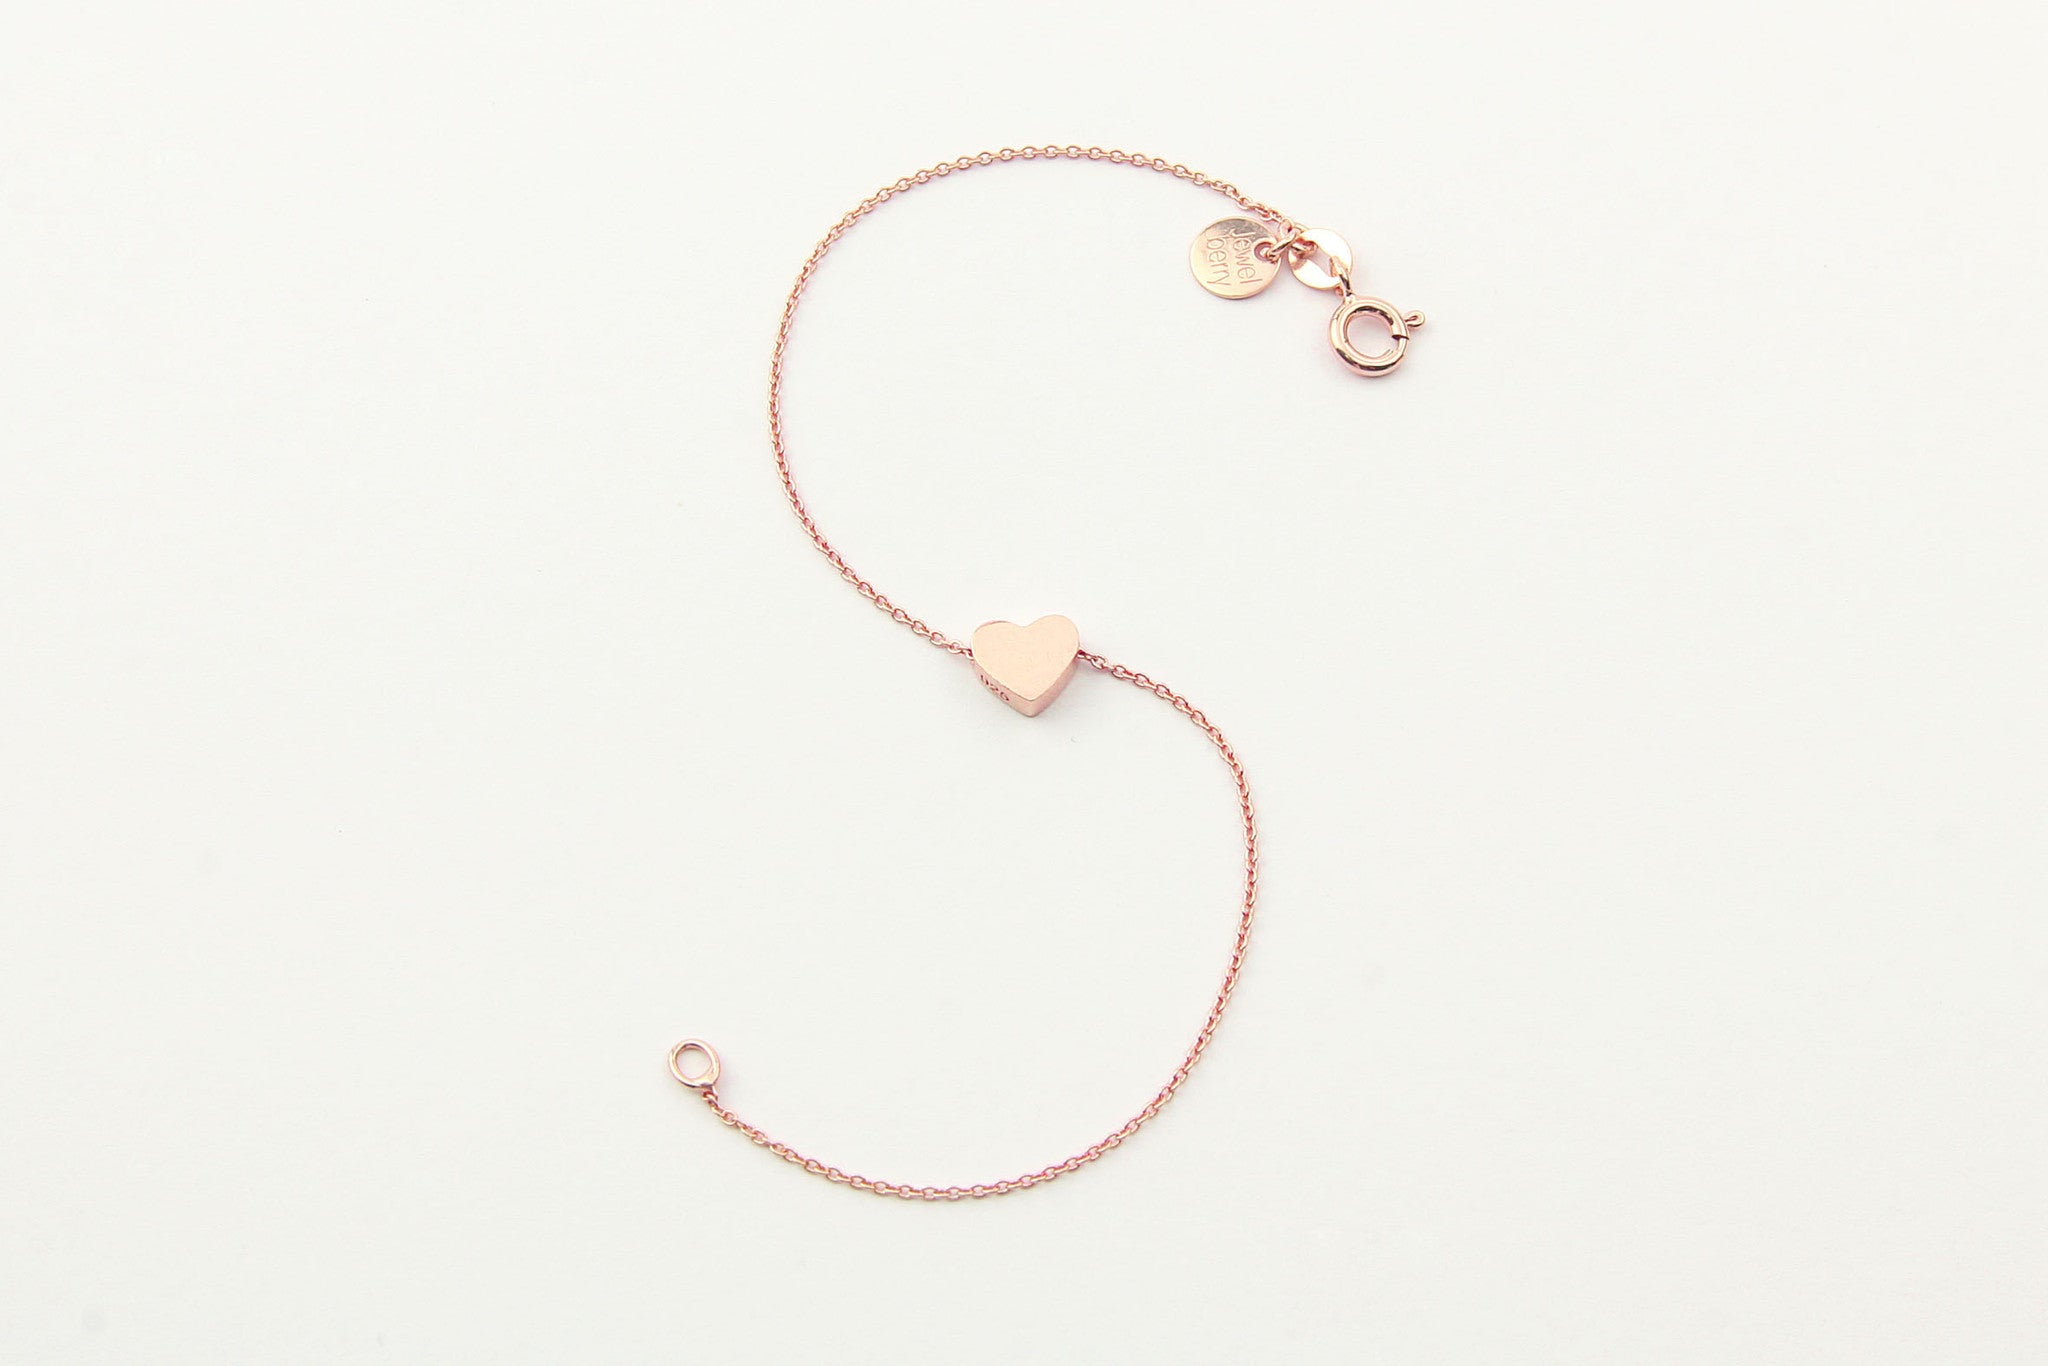 jewelberry armband bracelet little heart rose gold plated sterling silver fine jewelry handmade with love fairtrade anchor chain